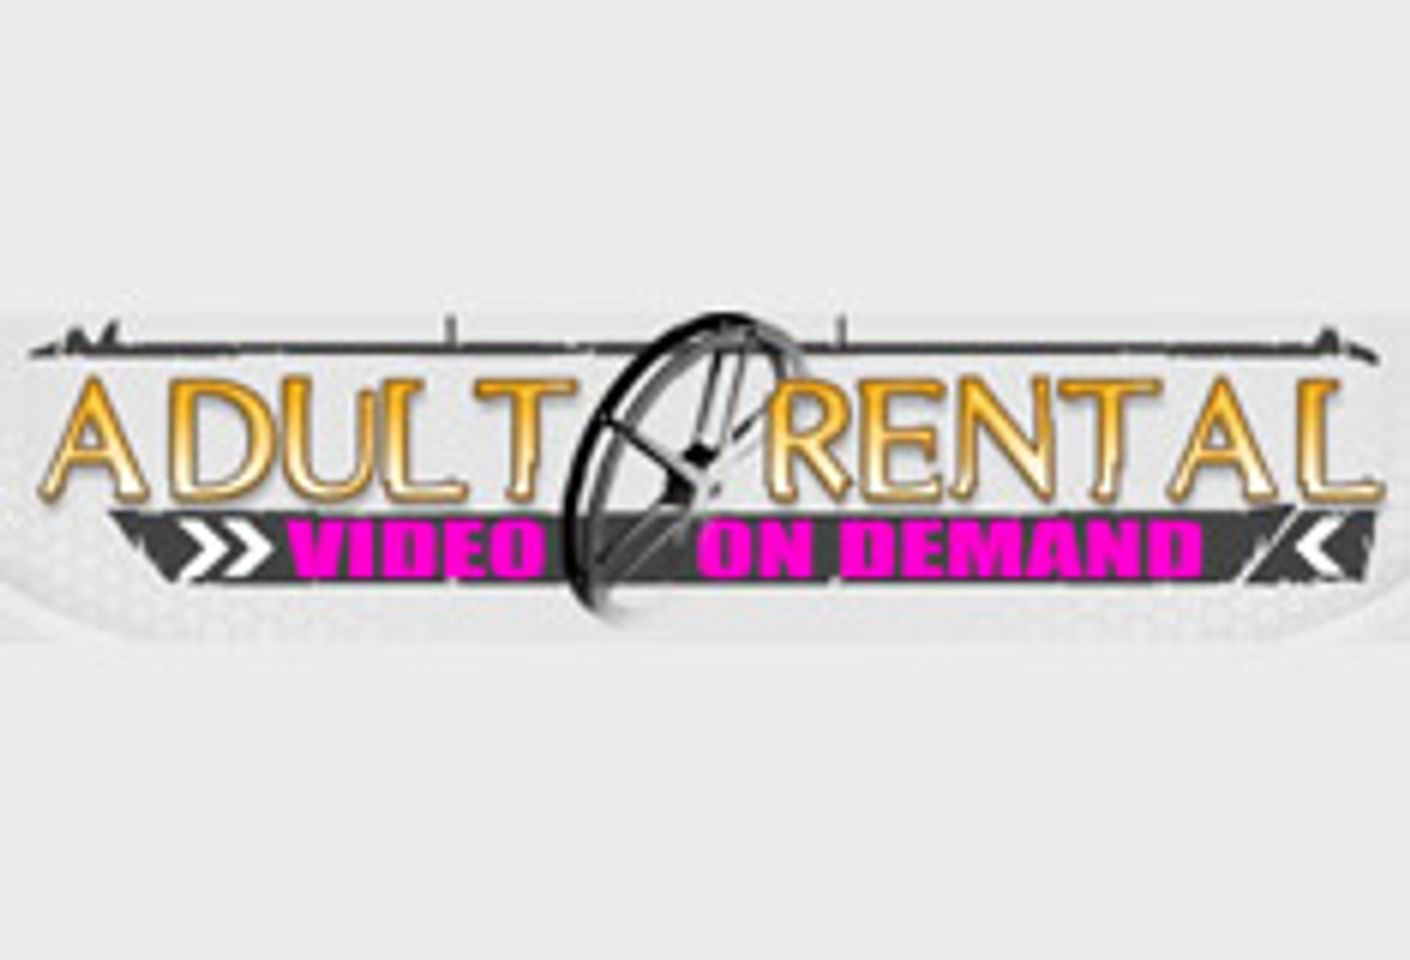 AdultRental.com Relaunches